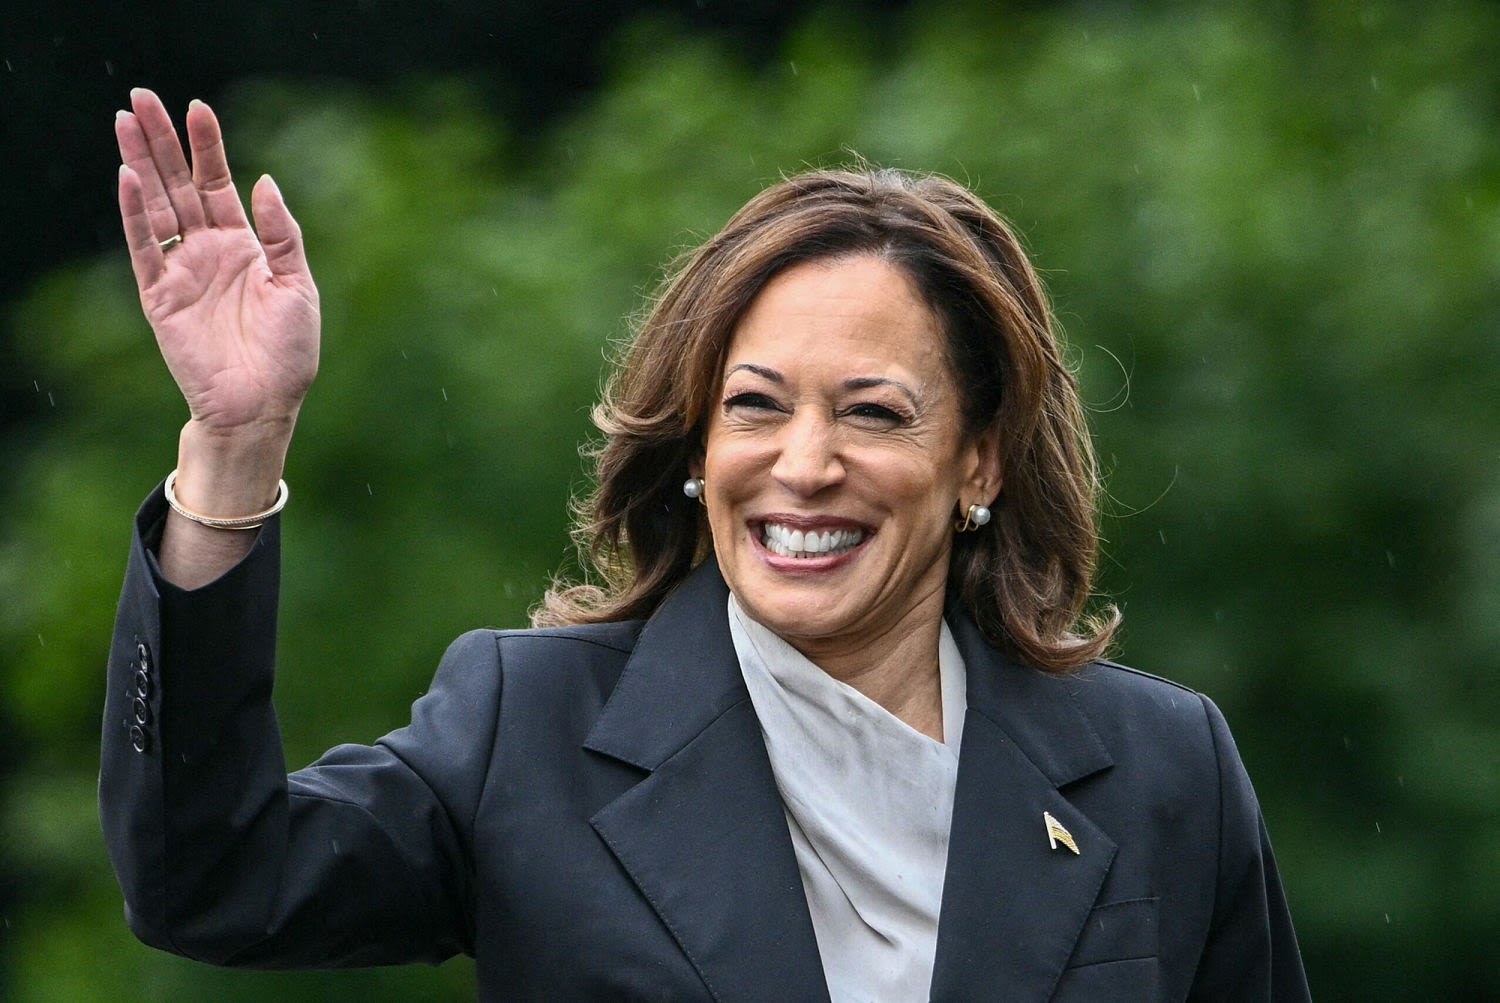 What the Kamala Harris 'coconut tree' meme is all about